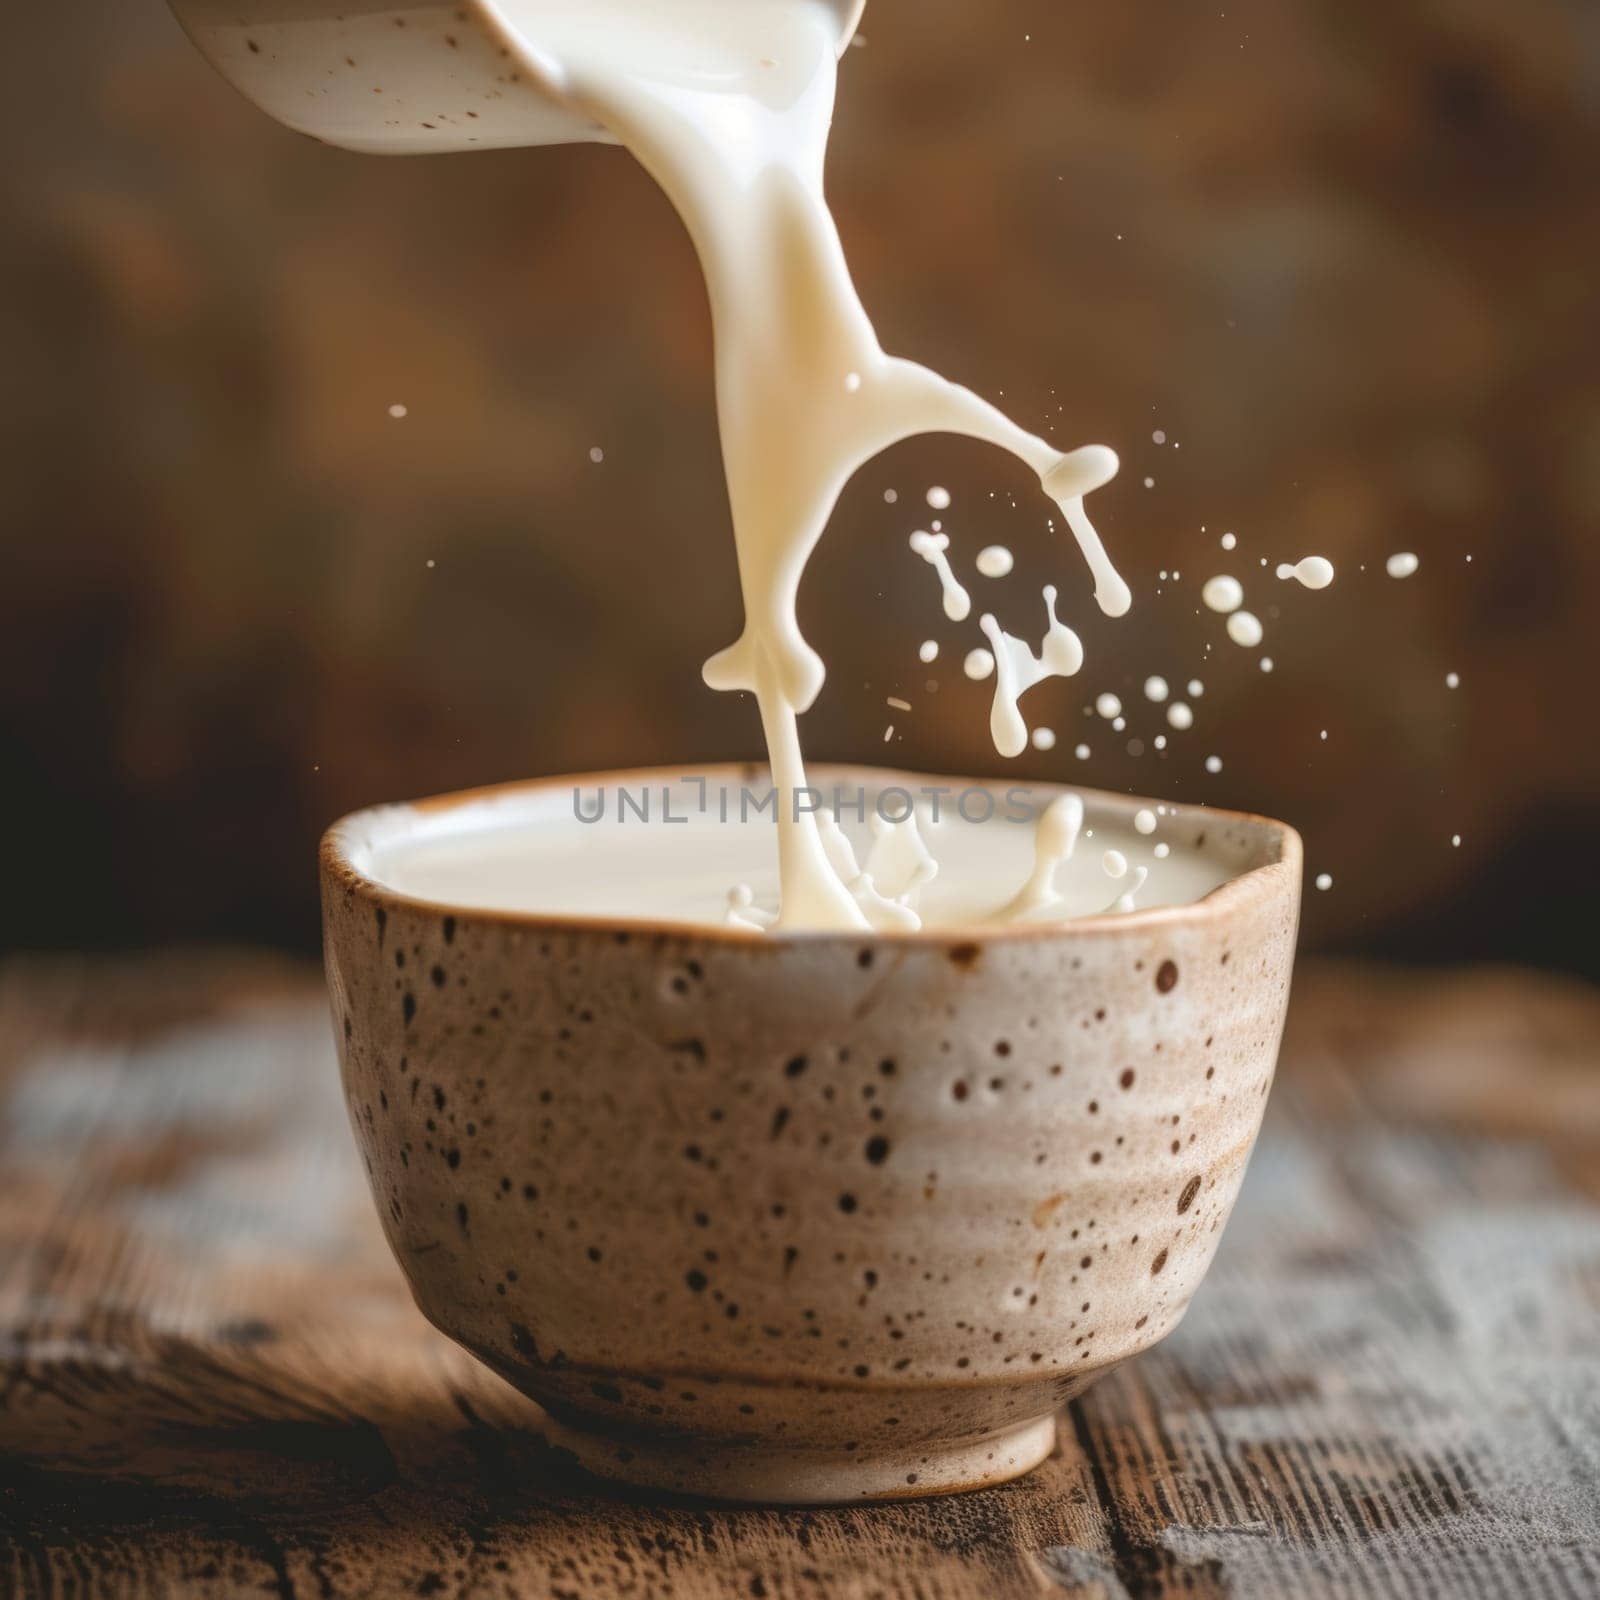 Action shot of milk being poured into a handcrafted ceramic bowl creating a splash. by sfinks